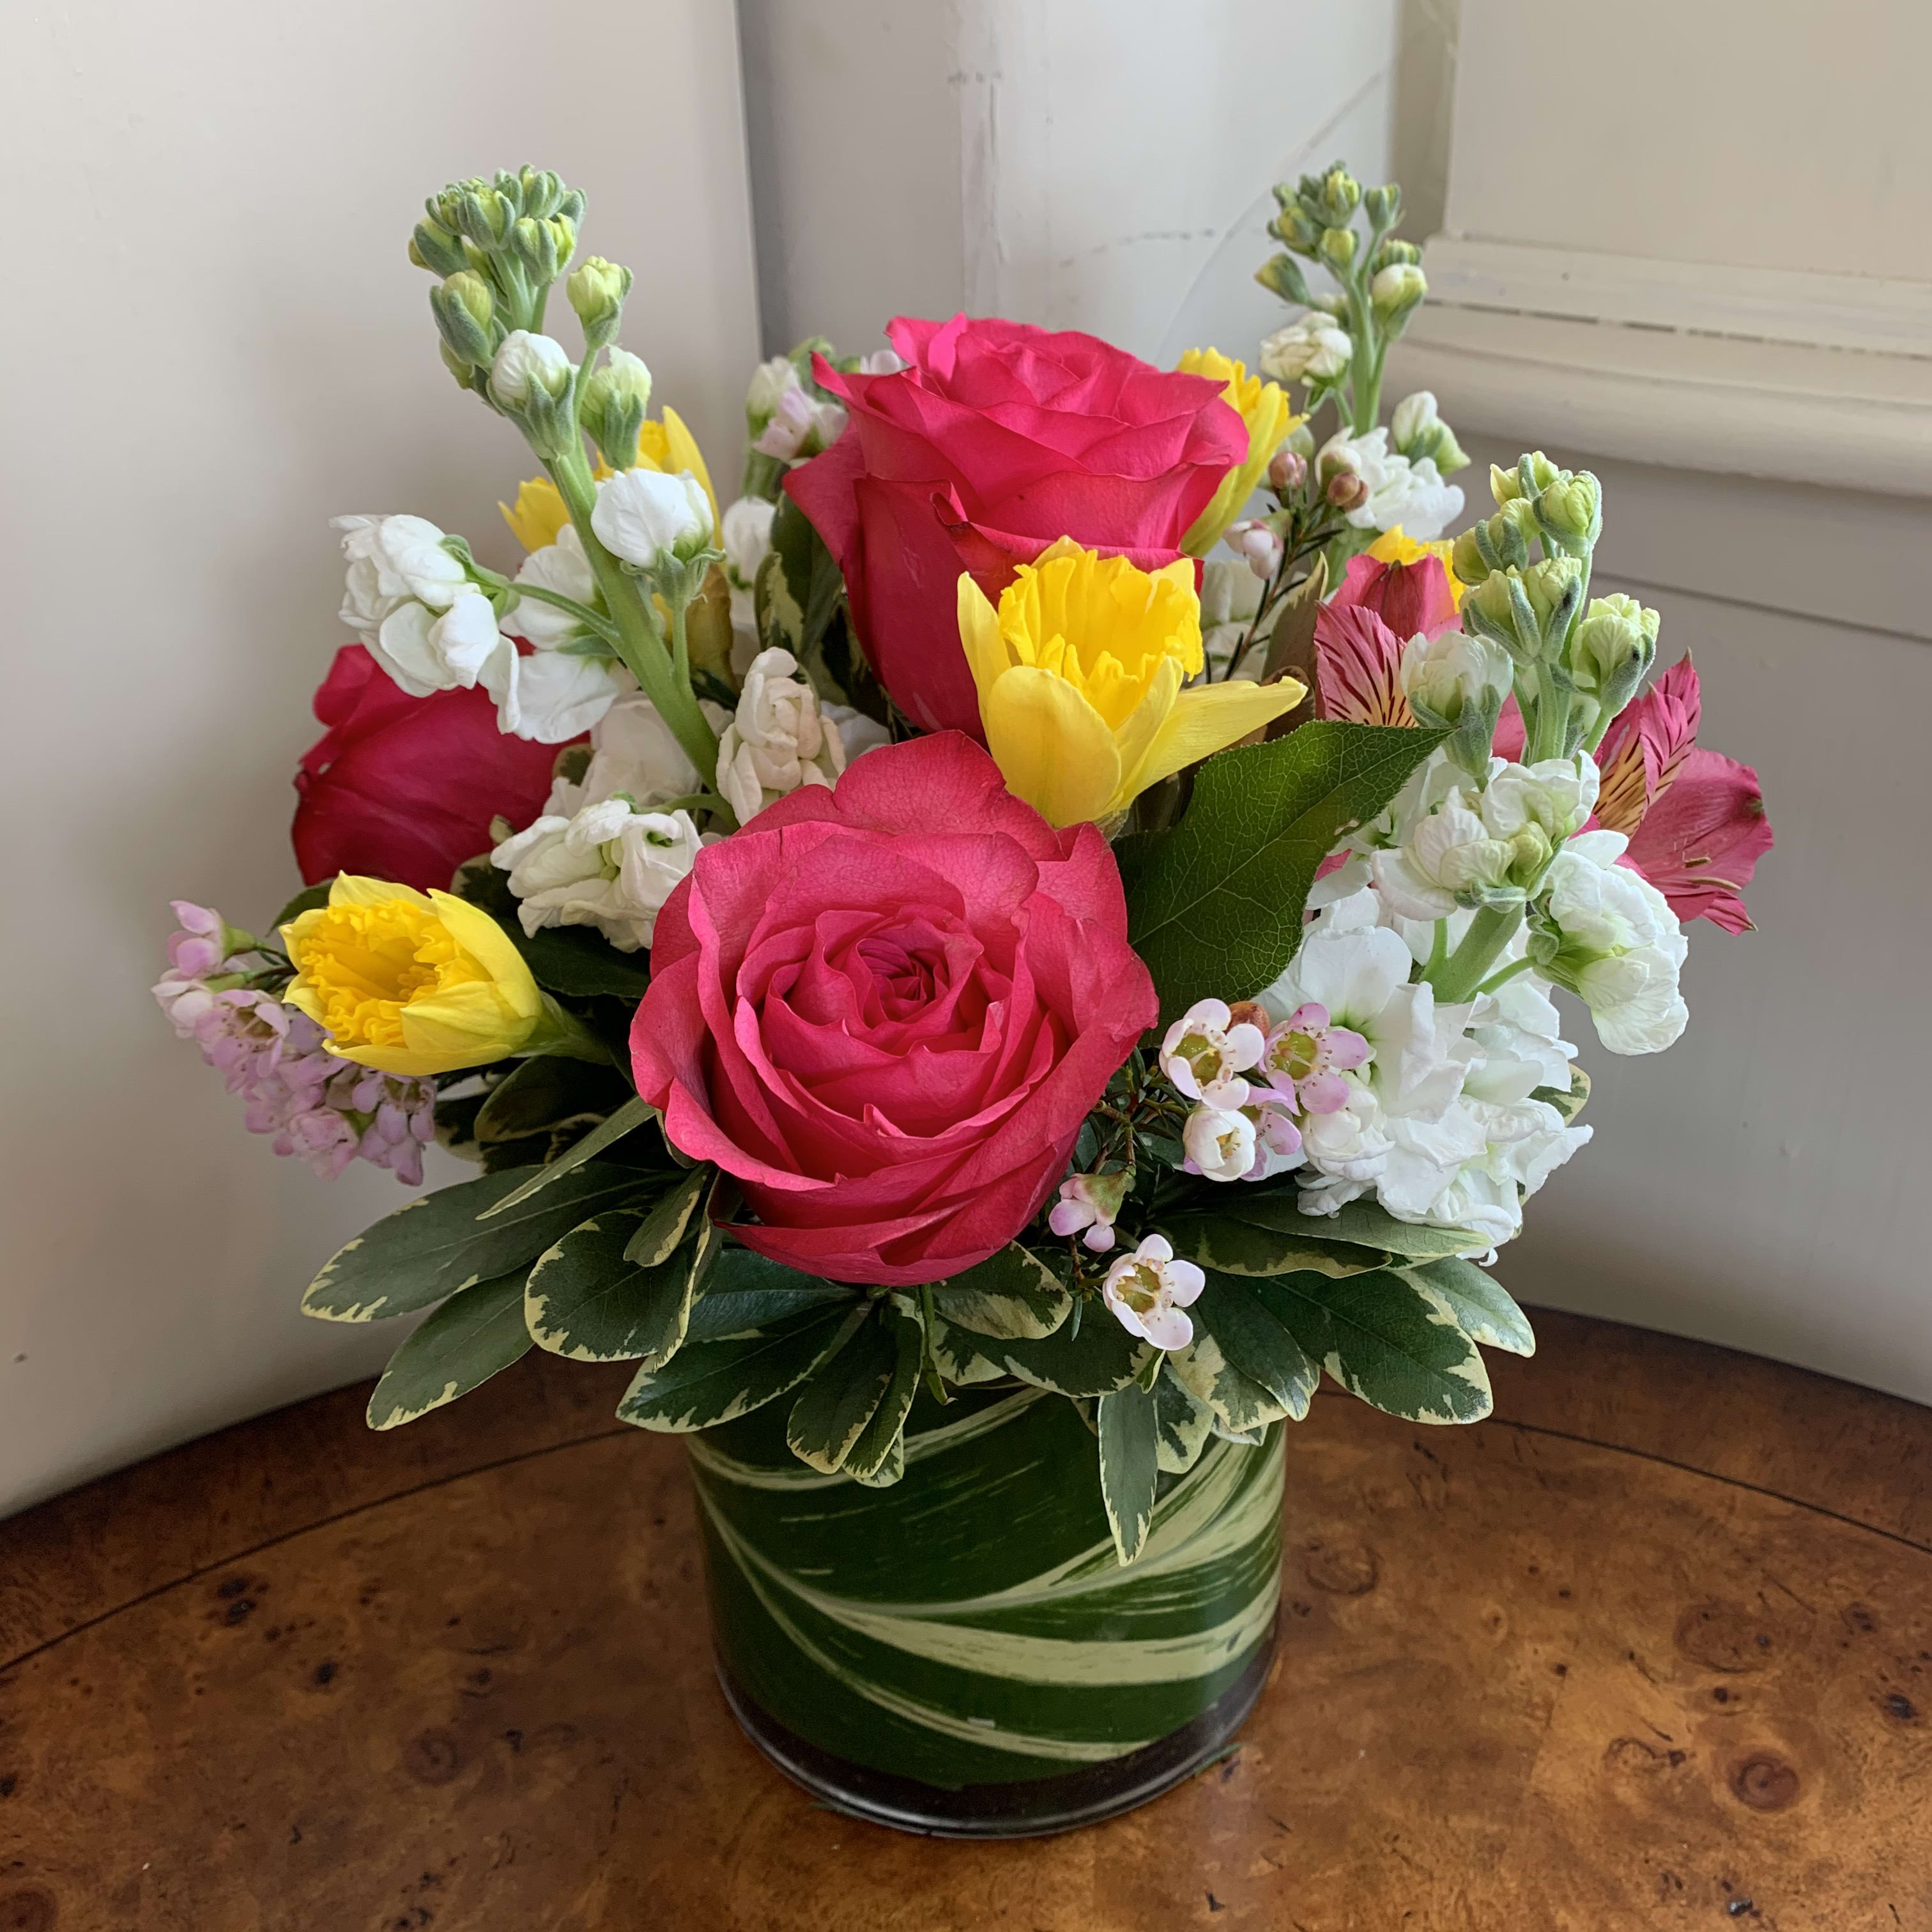 Smitten - Hot pink roses, daffodils, white stock, hot pink altromeria arranged with pink waxflower in a leaf lined medium gather vase. Approximatly 10&quot; tall by 10&quot; wide. 